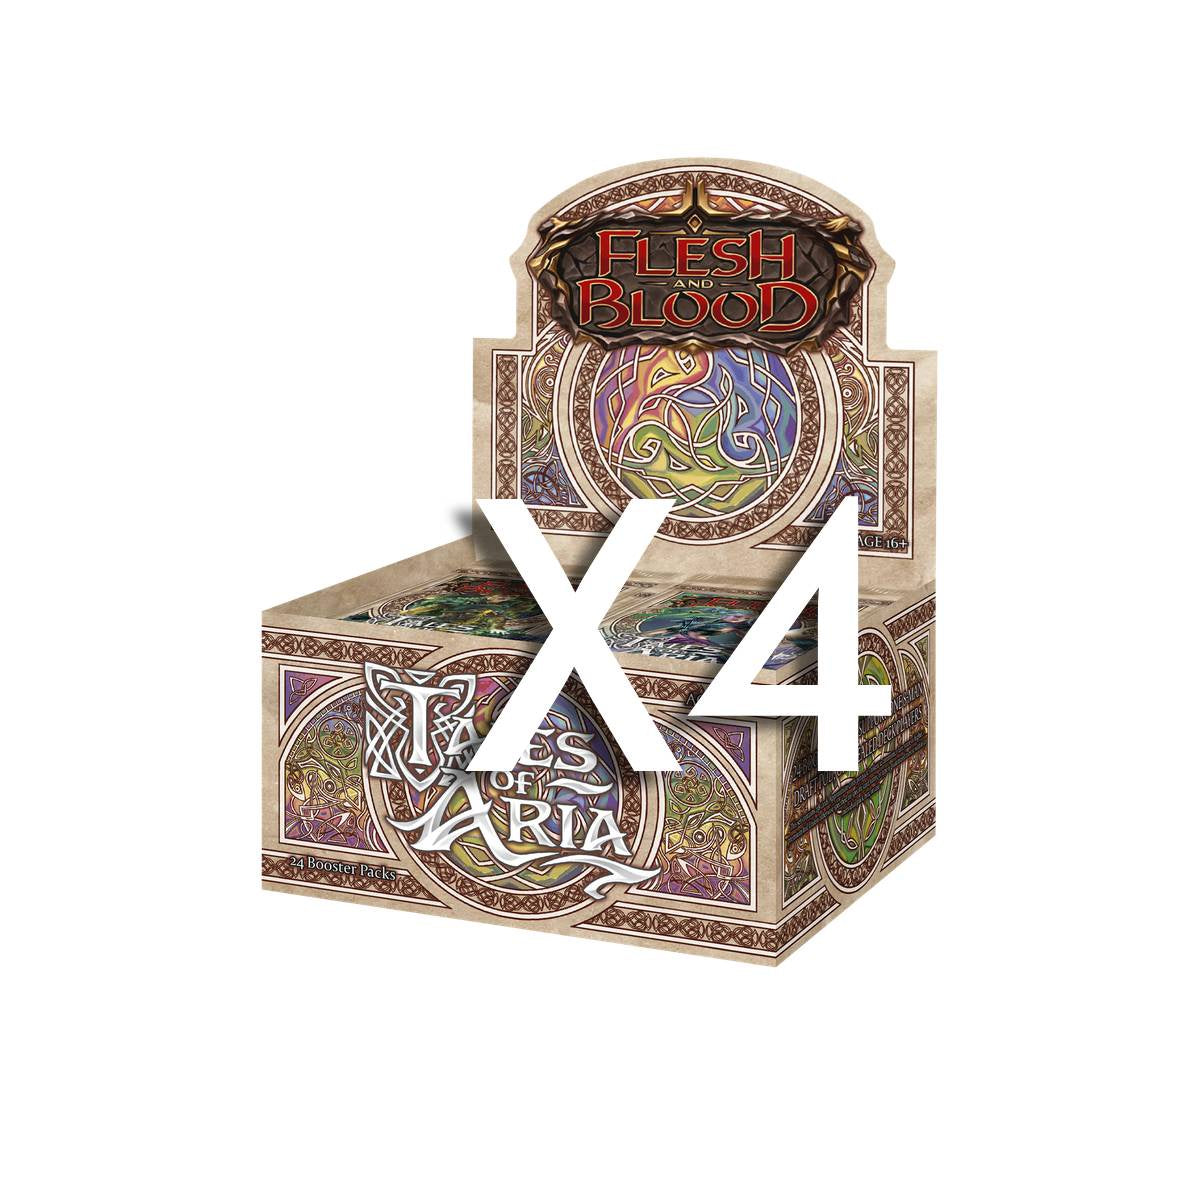 Flesh and Blood TCG - Tales of Aria Unlimited Edition Booster Case